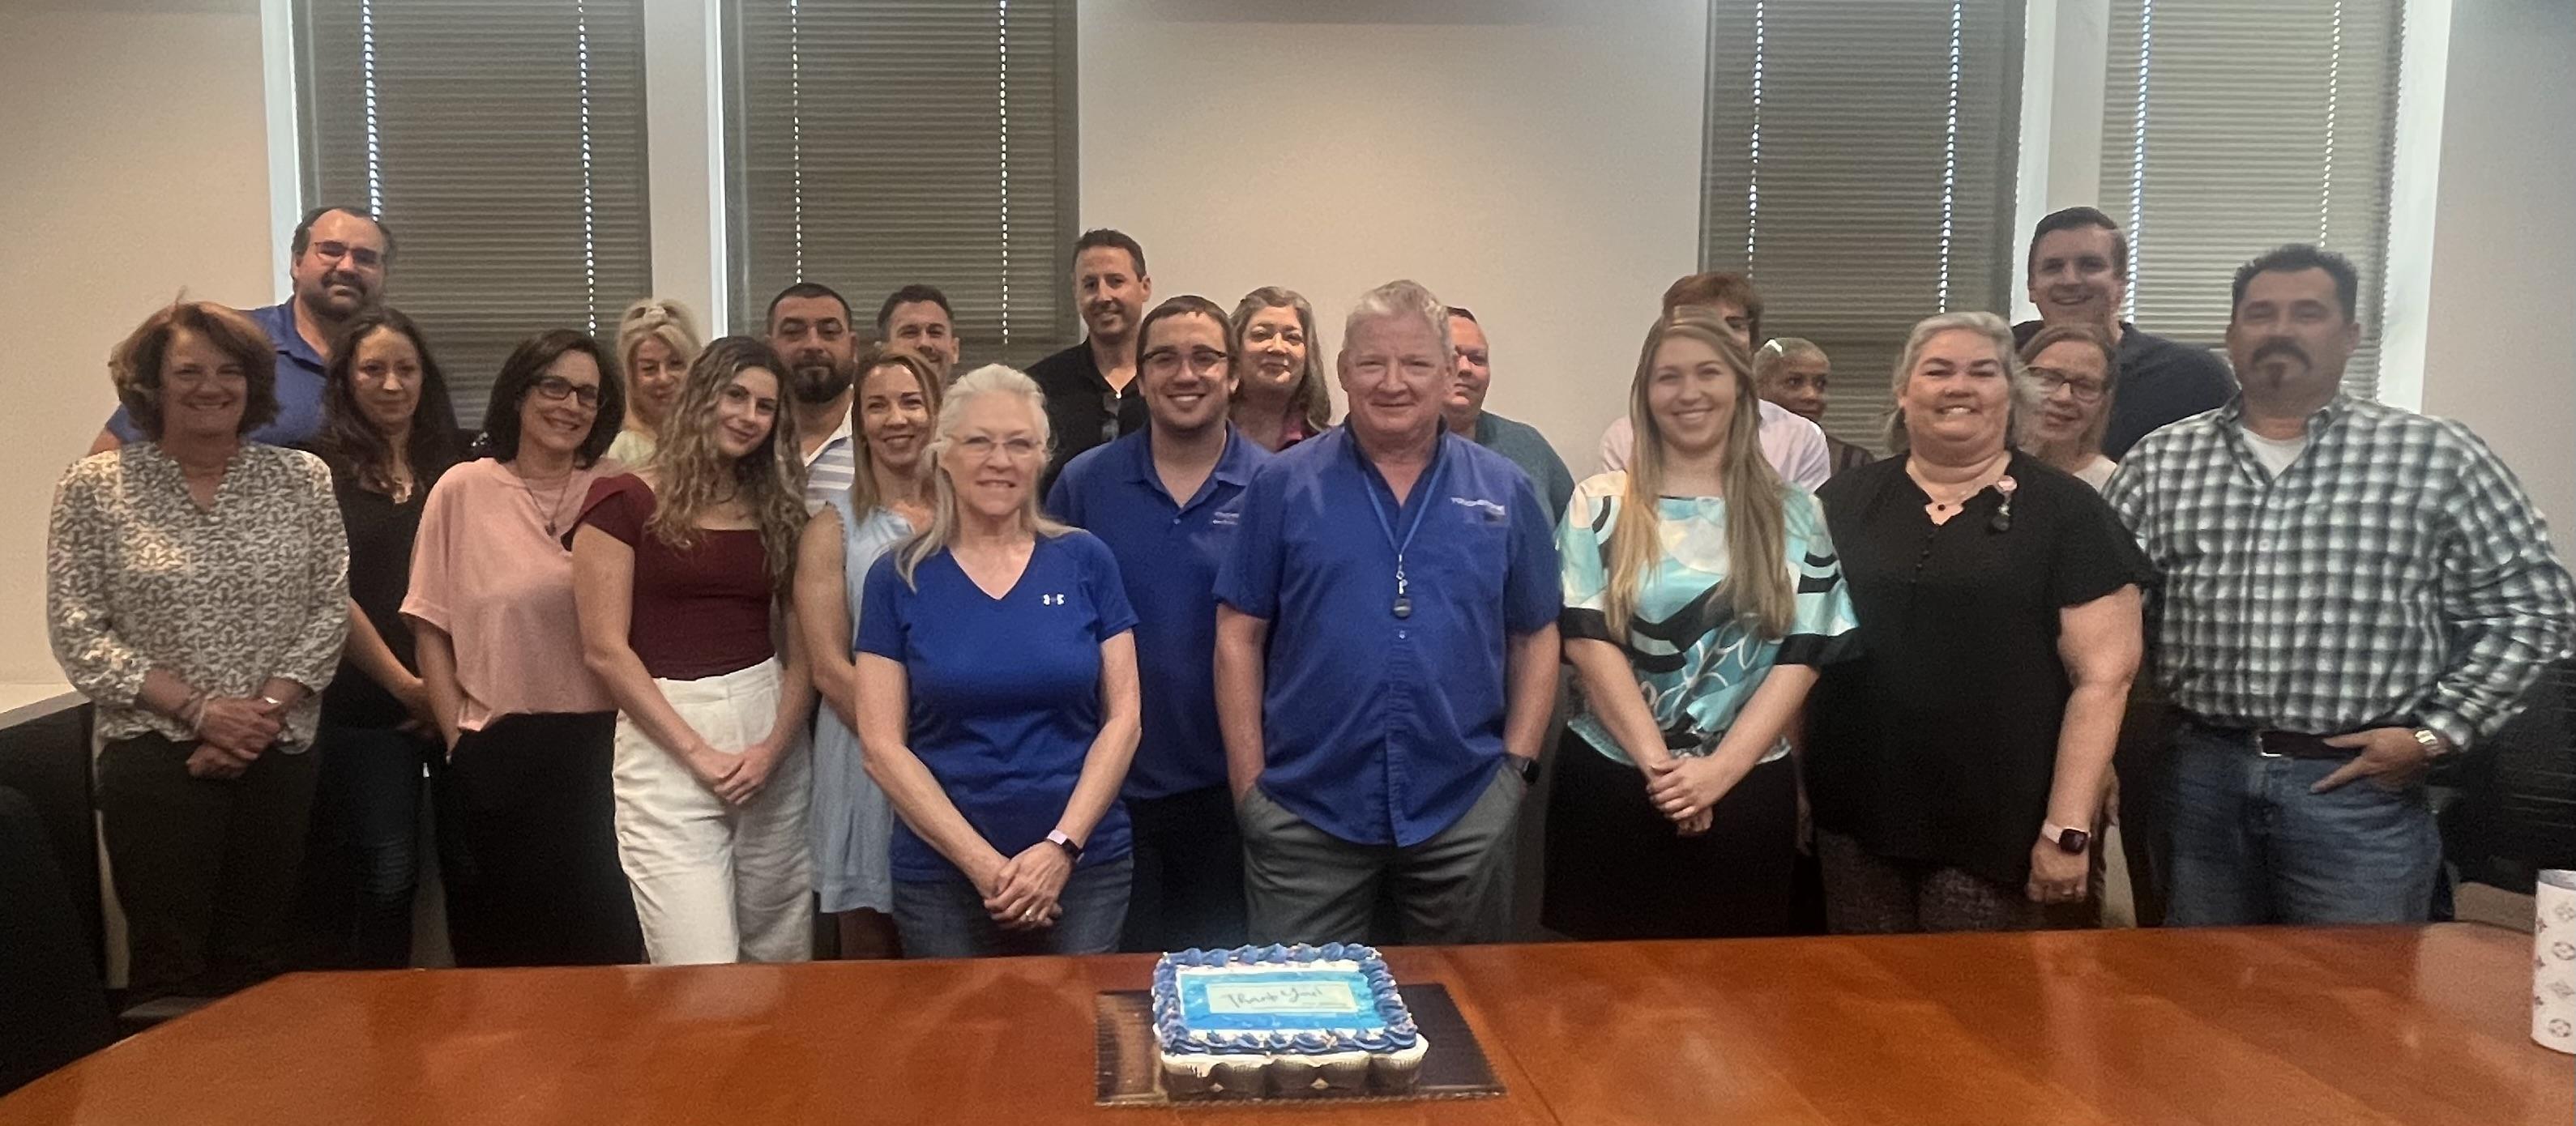 National Homeownership Month was a great time to celebrate our current and future homeowners! In addition, it was the perfect opportunity to show our appreciation to all the hard-working employees who make homeownership possible.